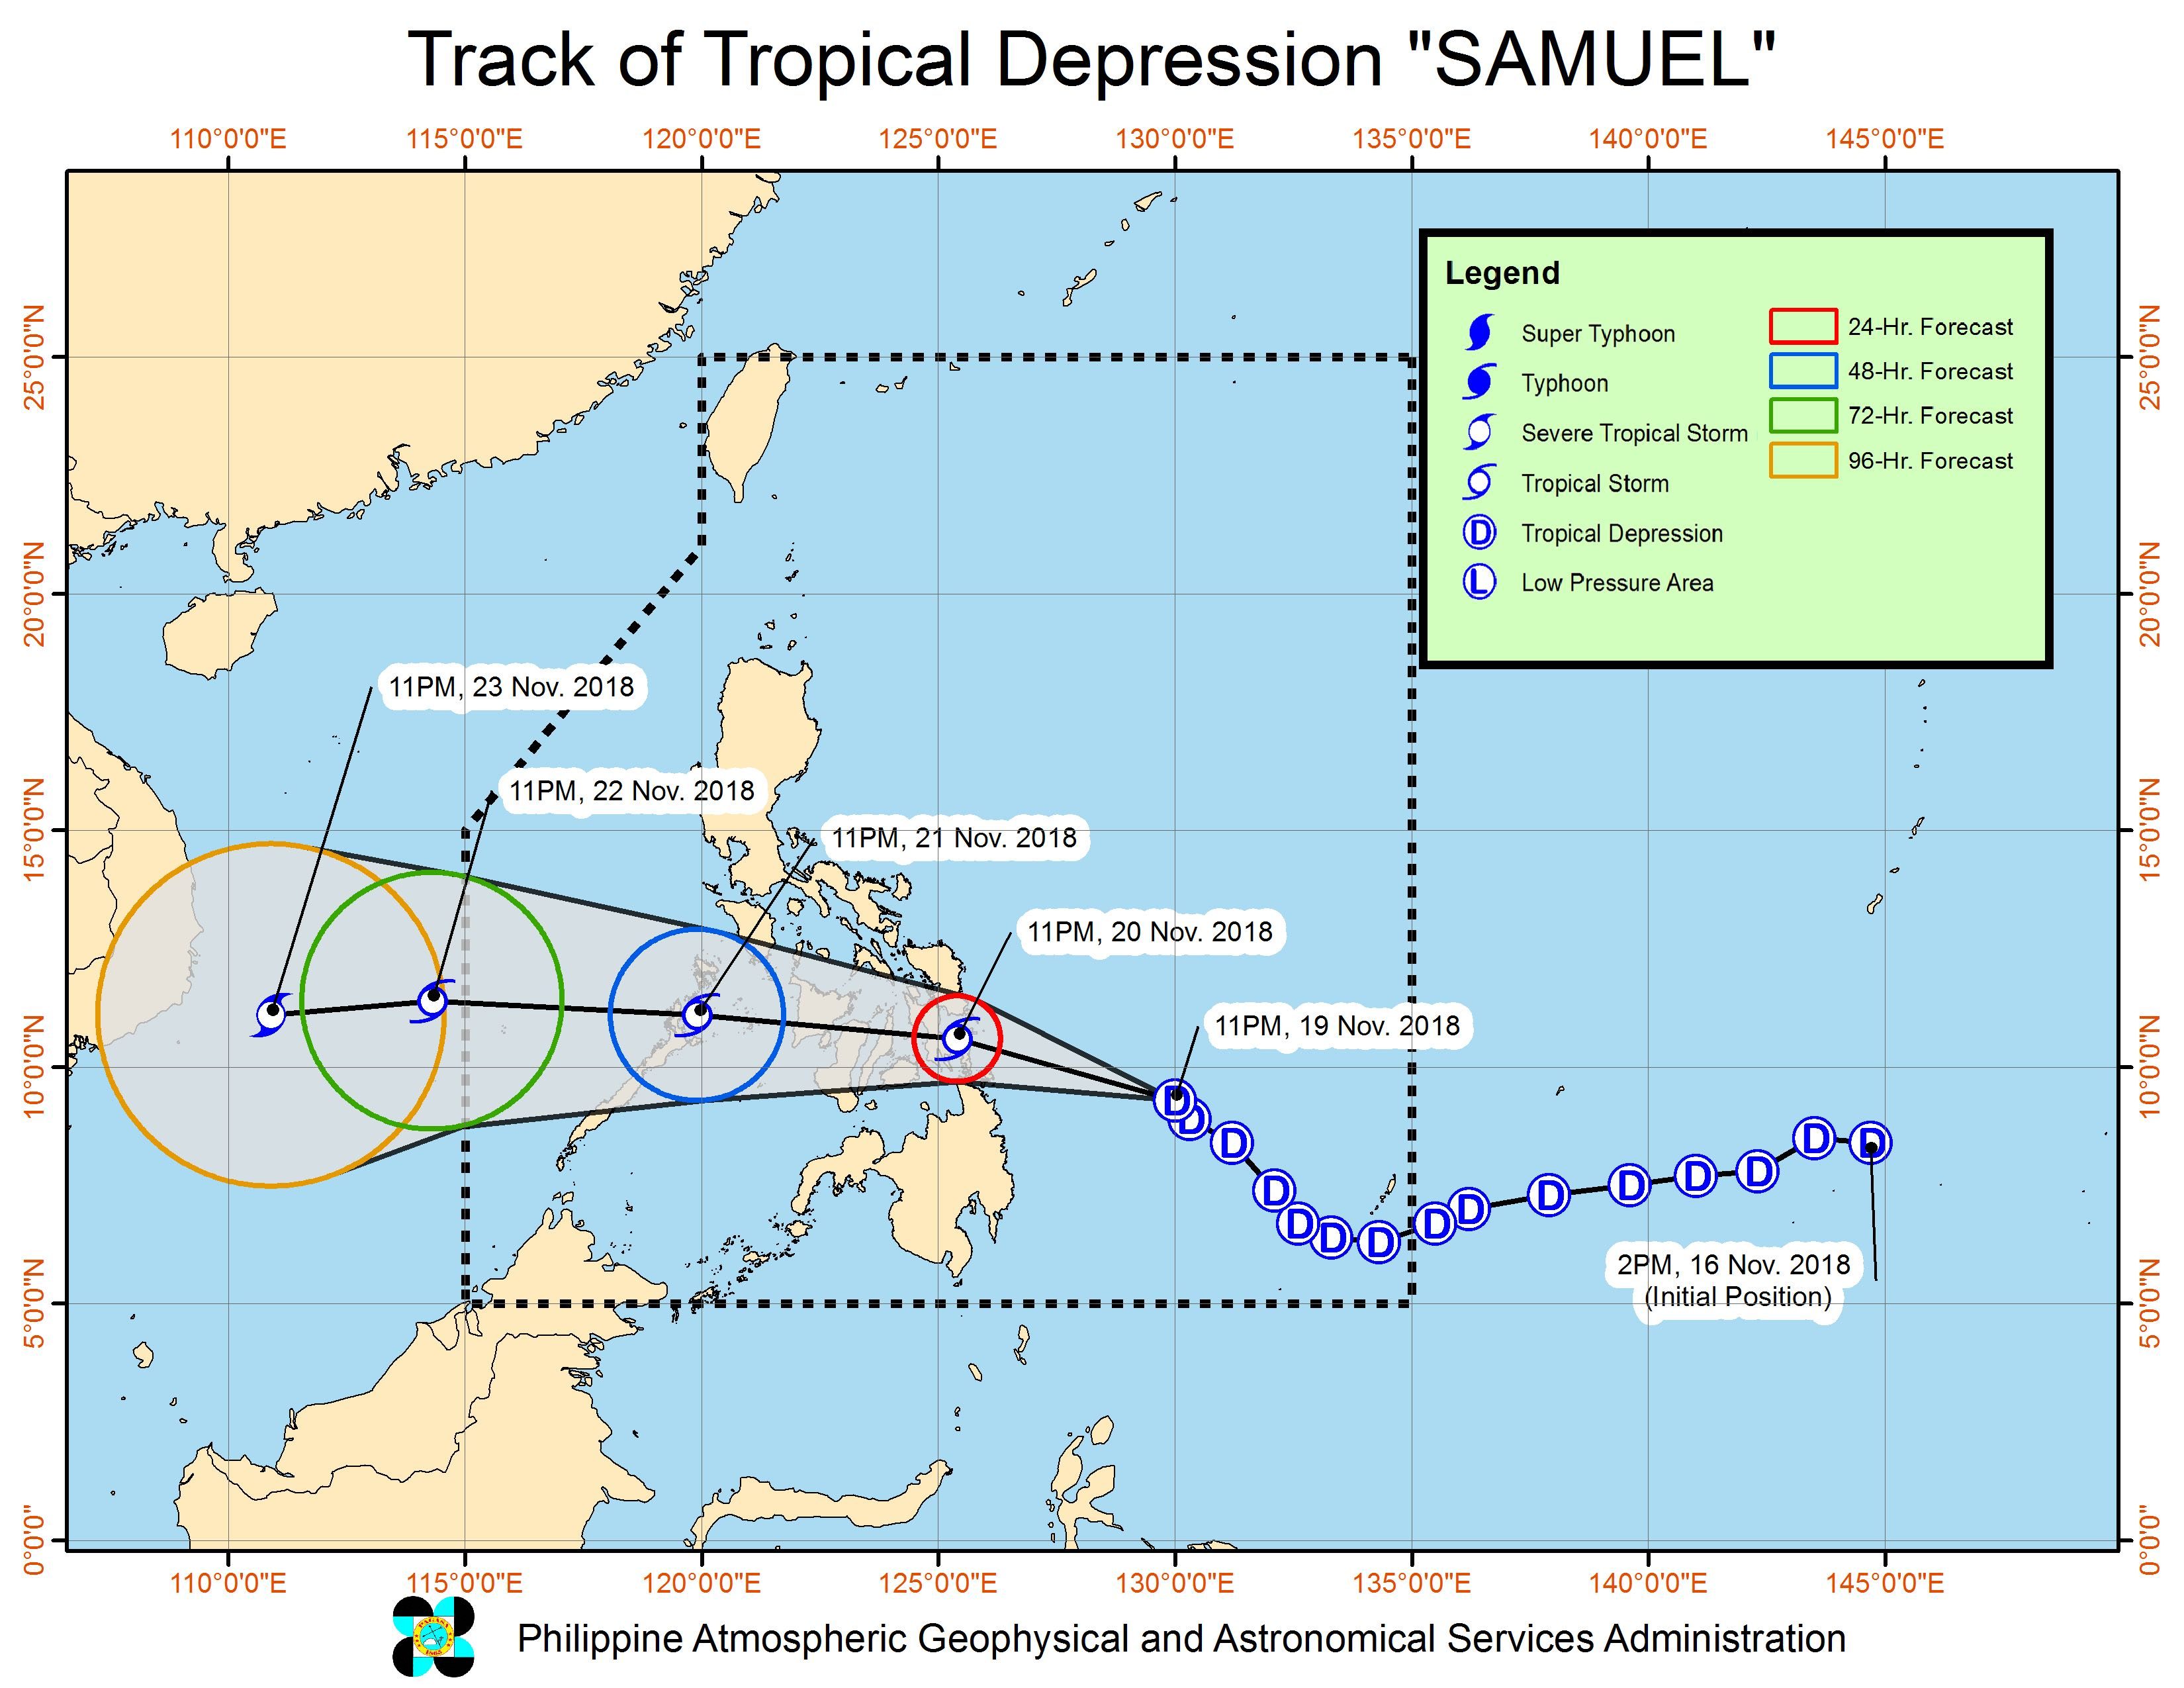 Forecast track of Tropical Depression Samuel as of November 20, 2018, 2 am. Image from PAGASA 